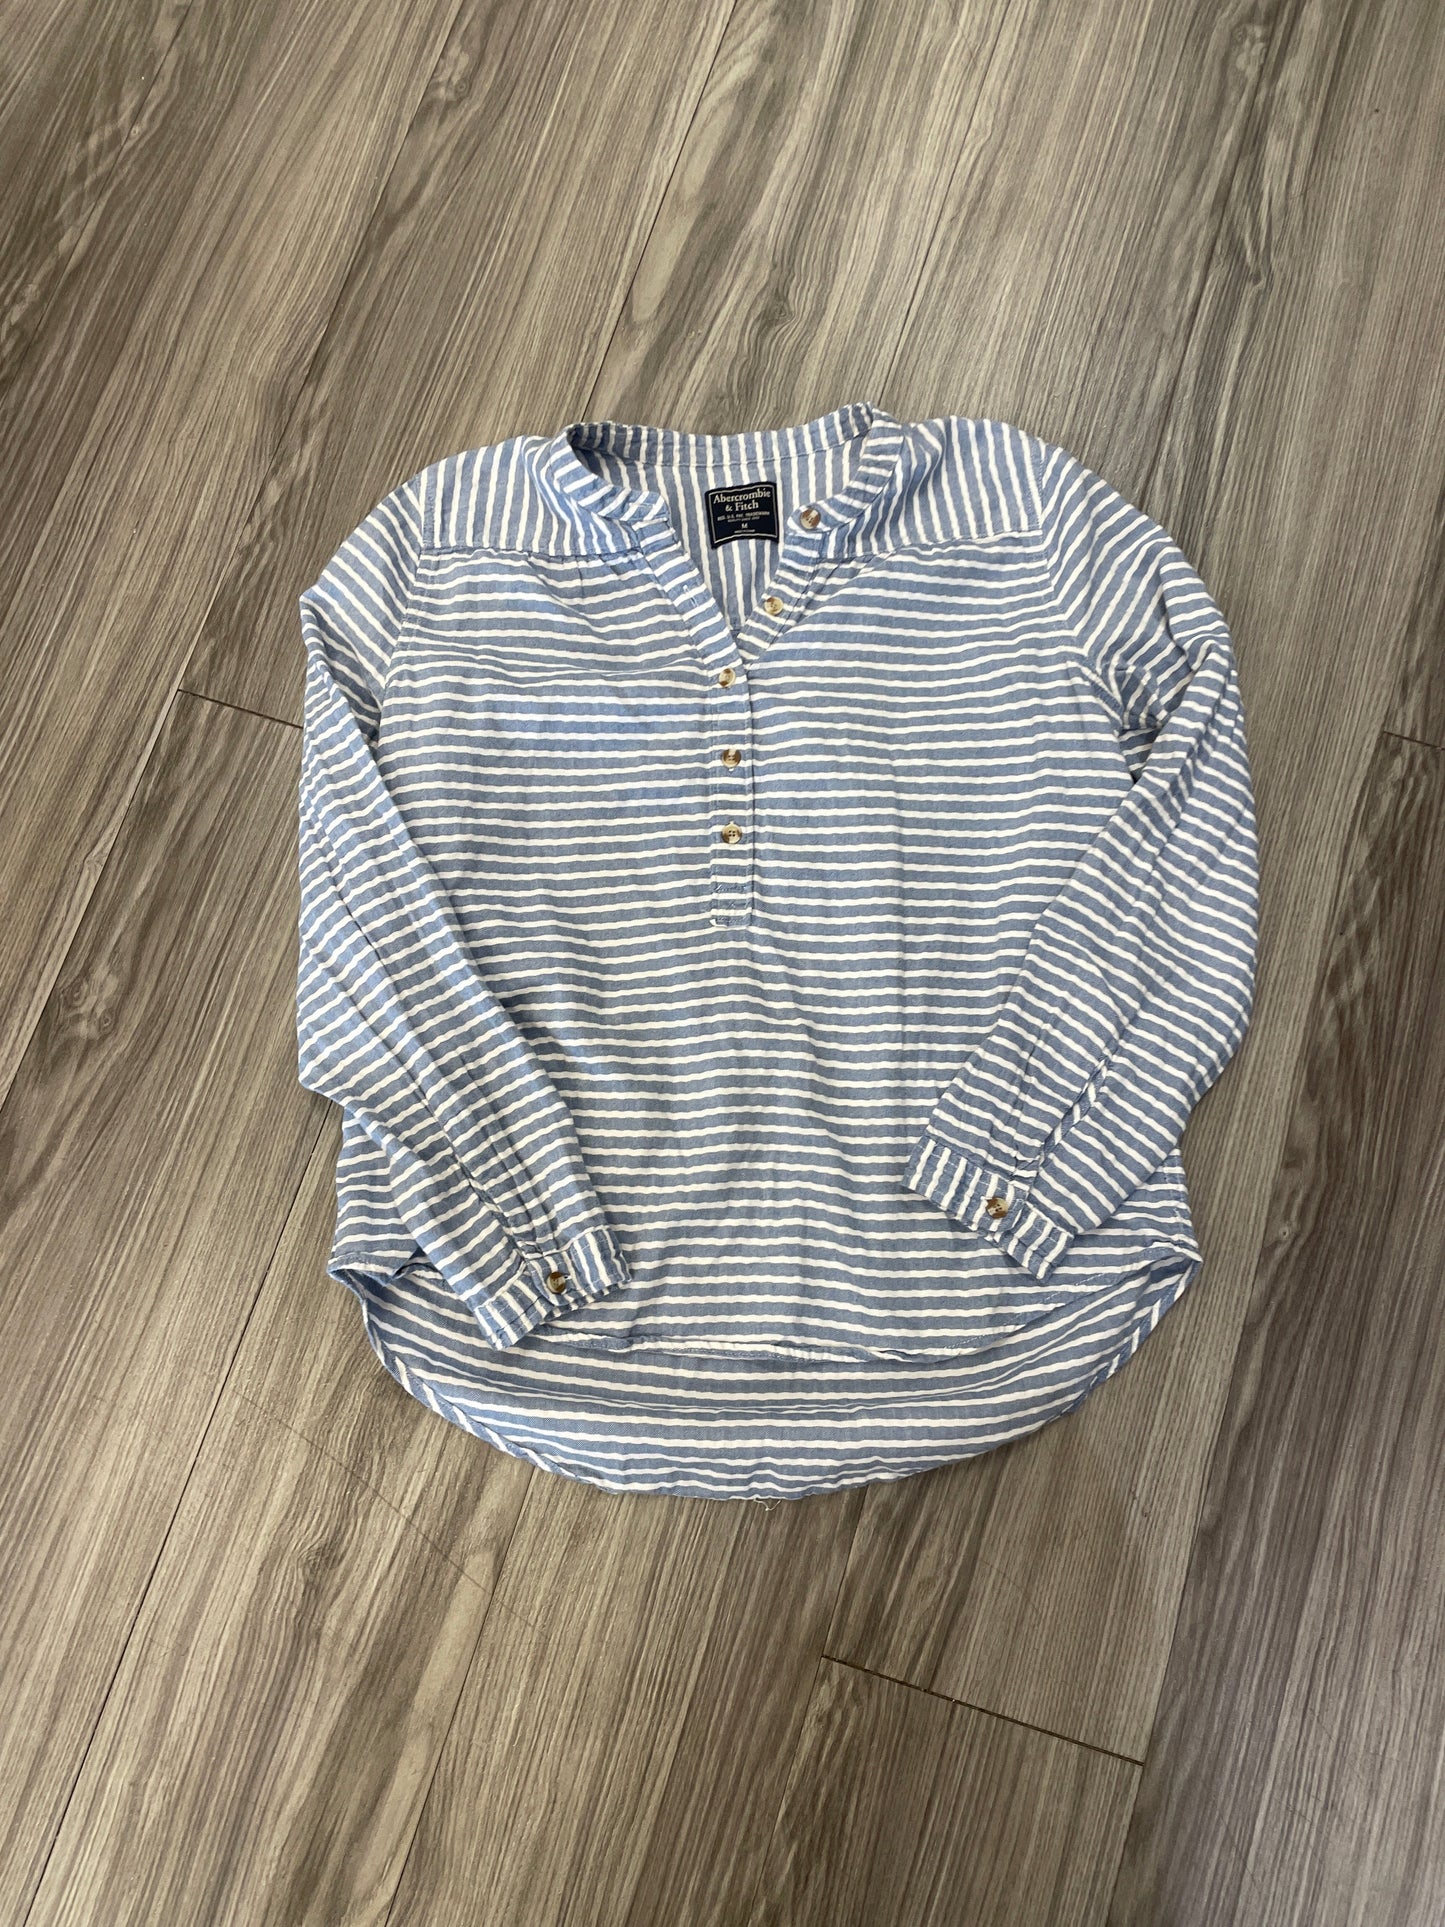 Striped Pattern Top Long Sleeve Abercrombie And Fitch, Size M